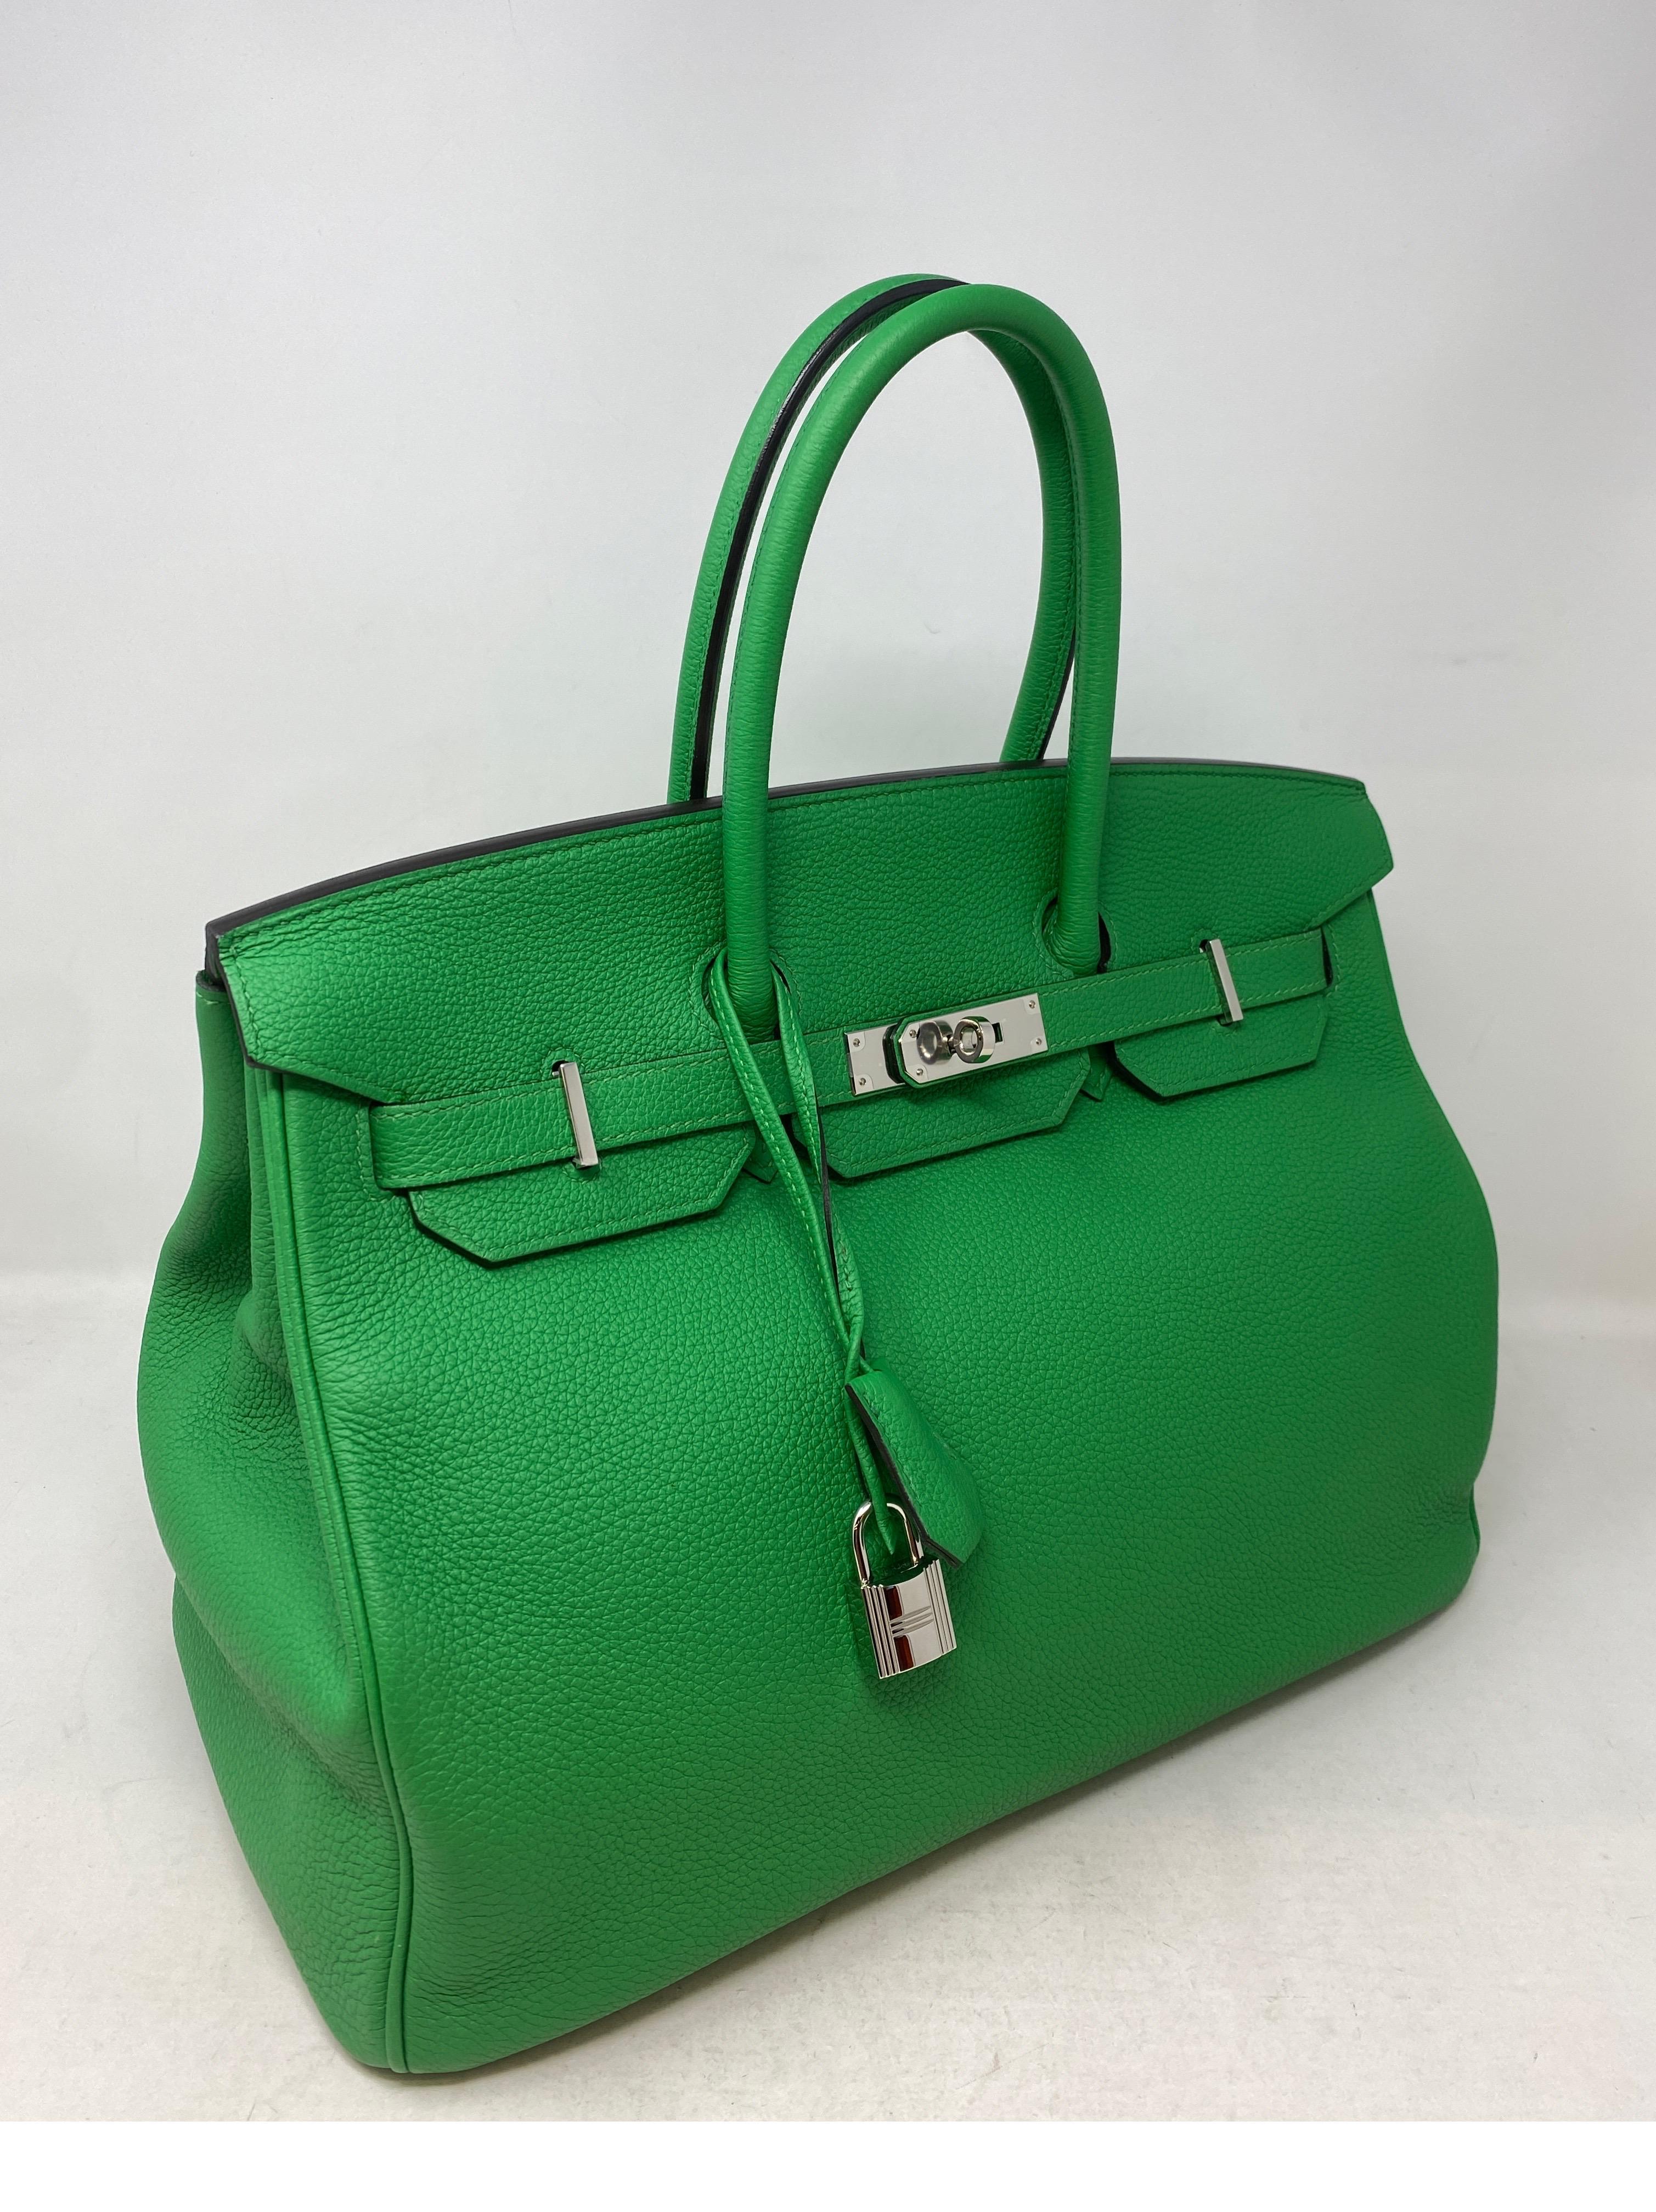 Hermes Bamboo Birkin 35 Bag. Rare bamboo green color Birkin with palladium hardware. Togo leather. Excellent like new condition. Includes clochette, lock, keys, and dust cover. Guaranteed authentic. 